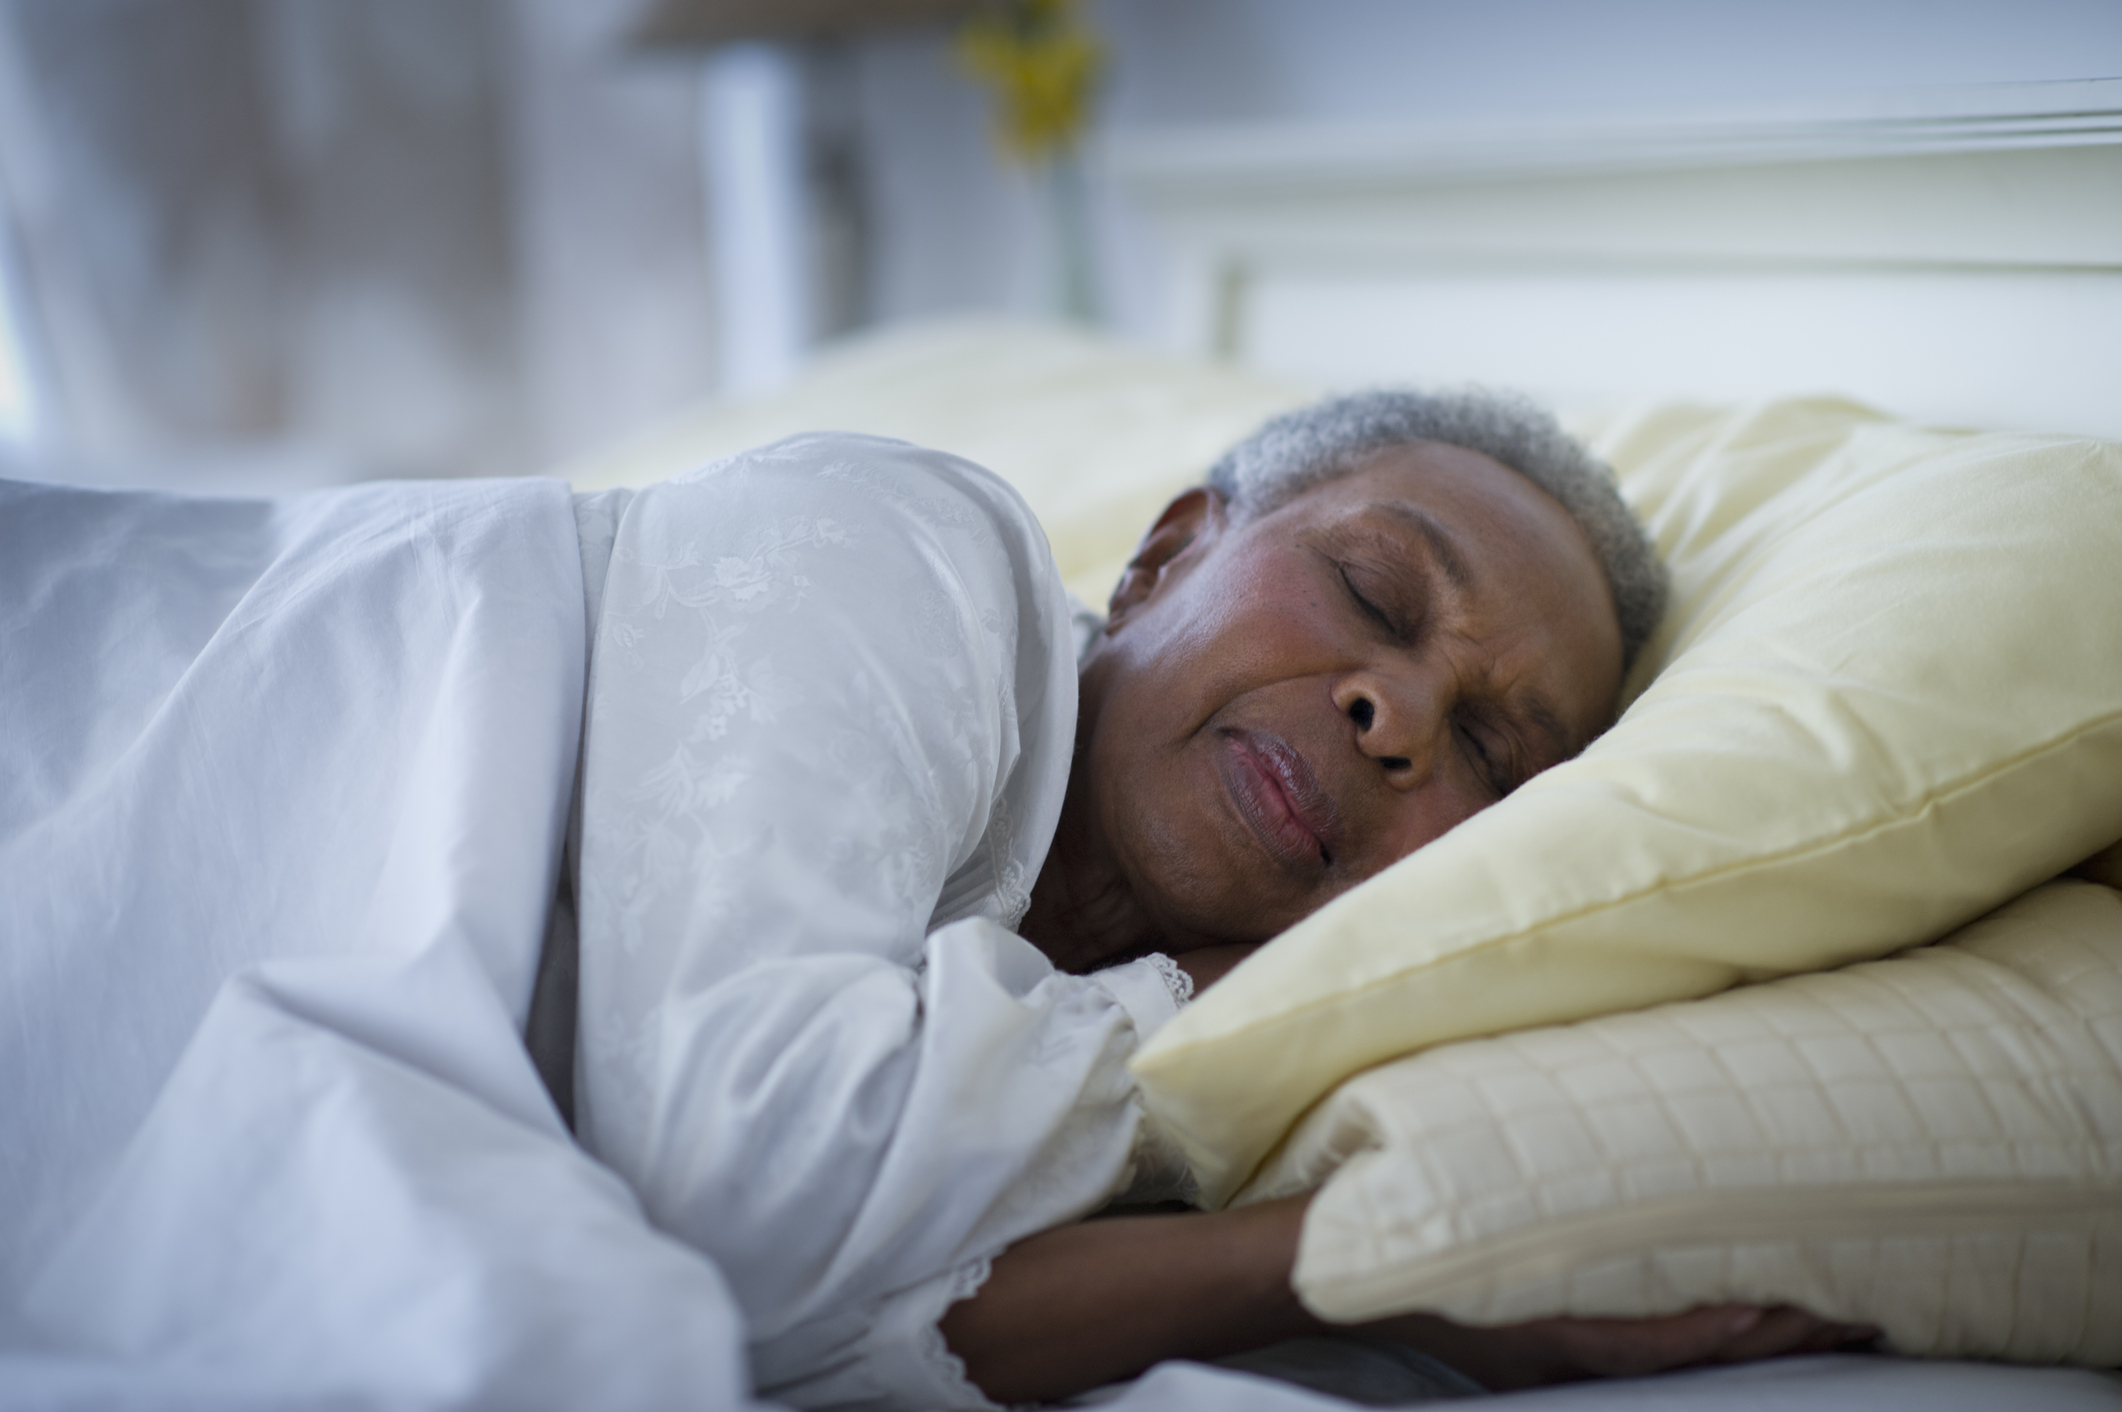 Study of Sleep in Older Adults Suggests Nixing Naps, Striving for 7-9 Hours a Night